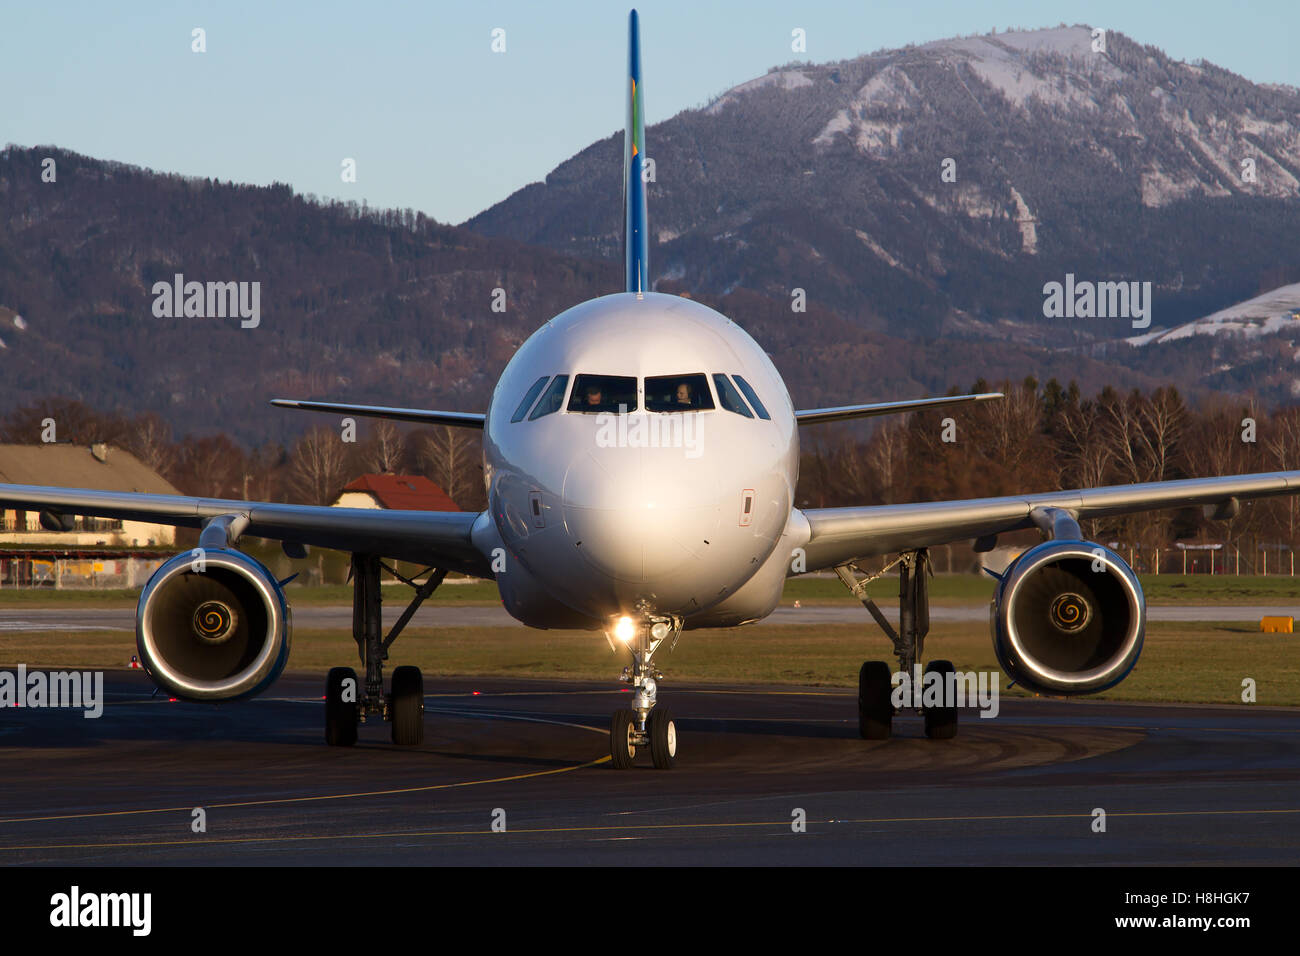 Salzburg/Austria August 9, 2016: Airbus from Small planet landing at Salzburg Airport. Stock Photo